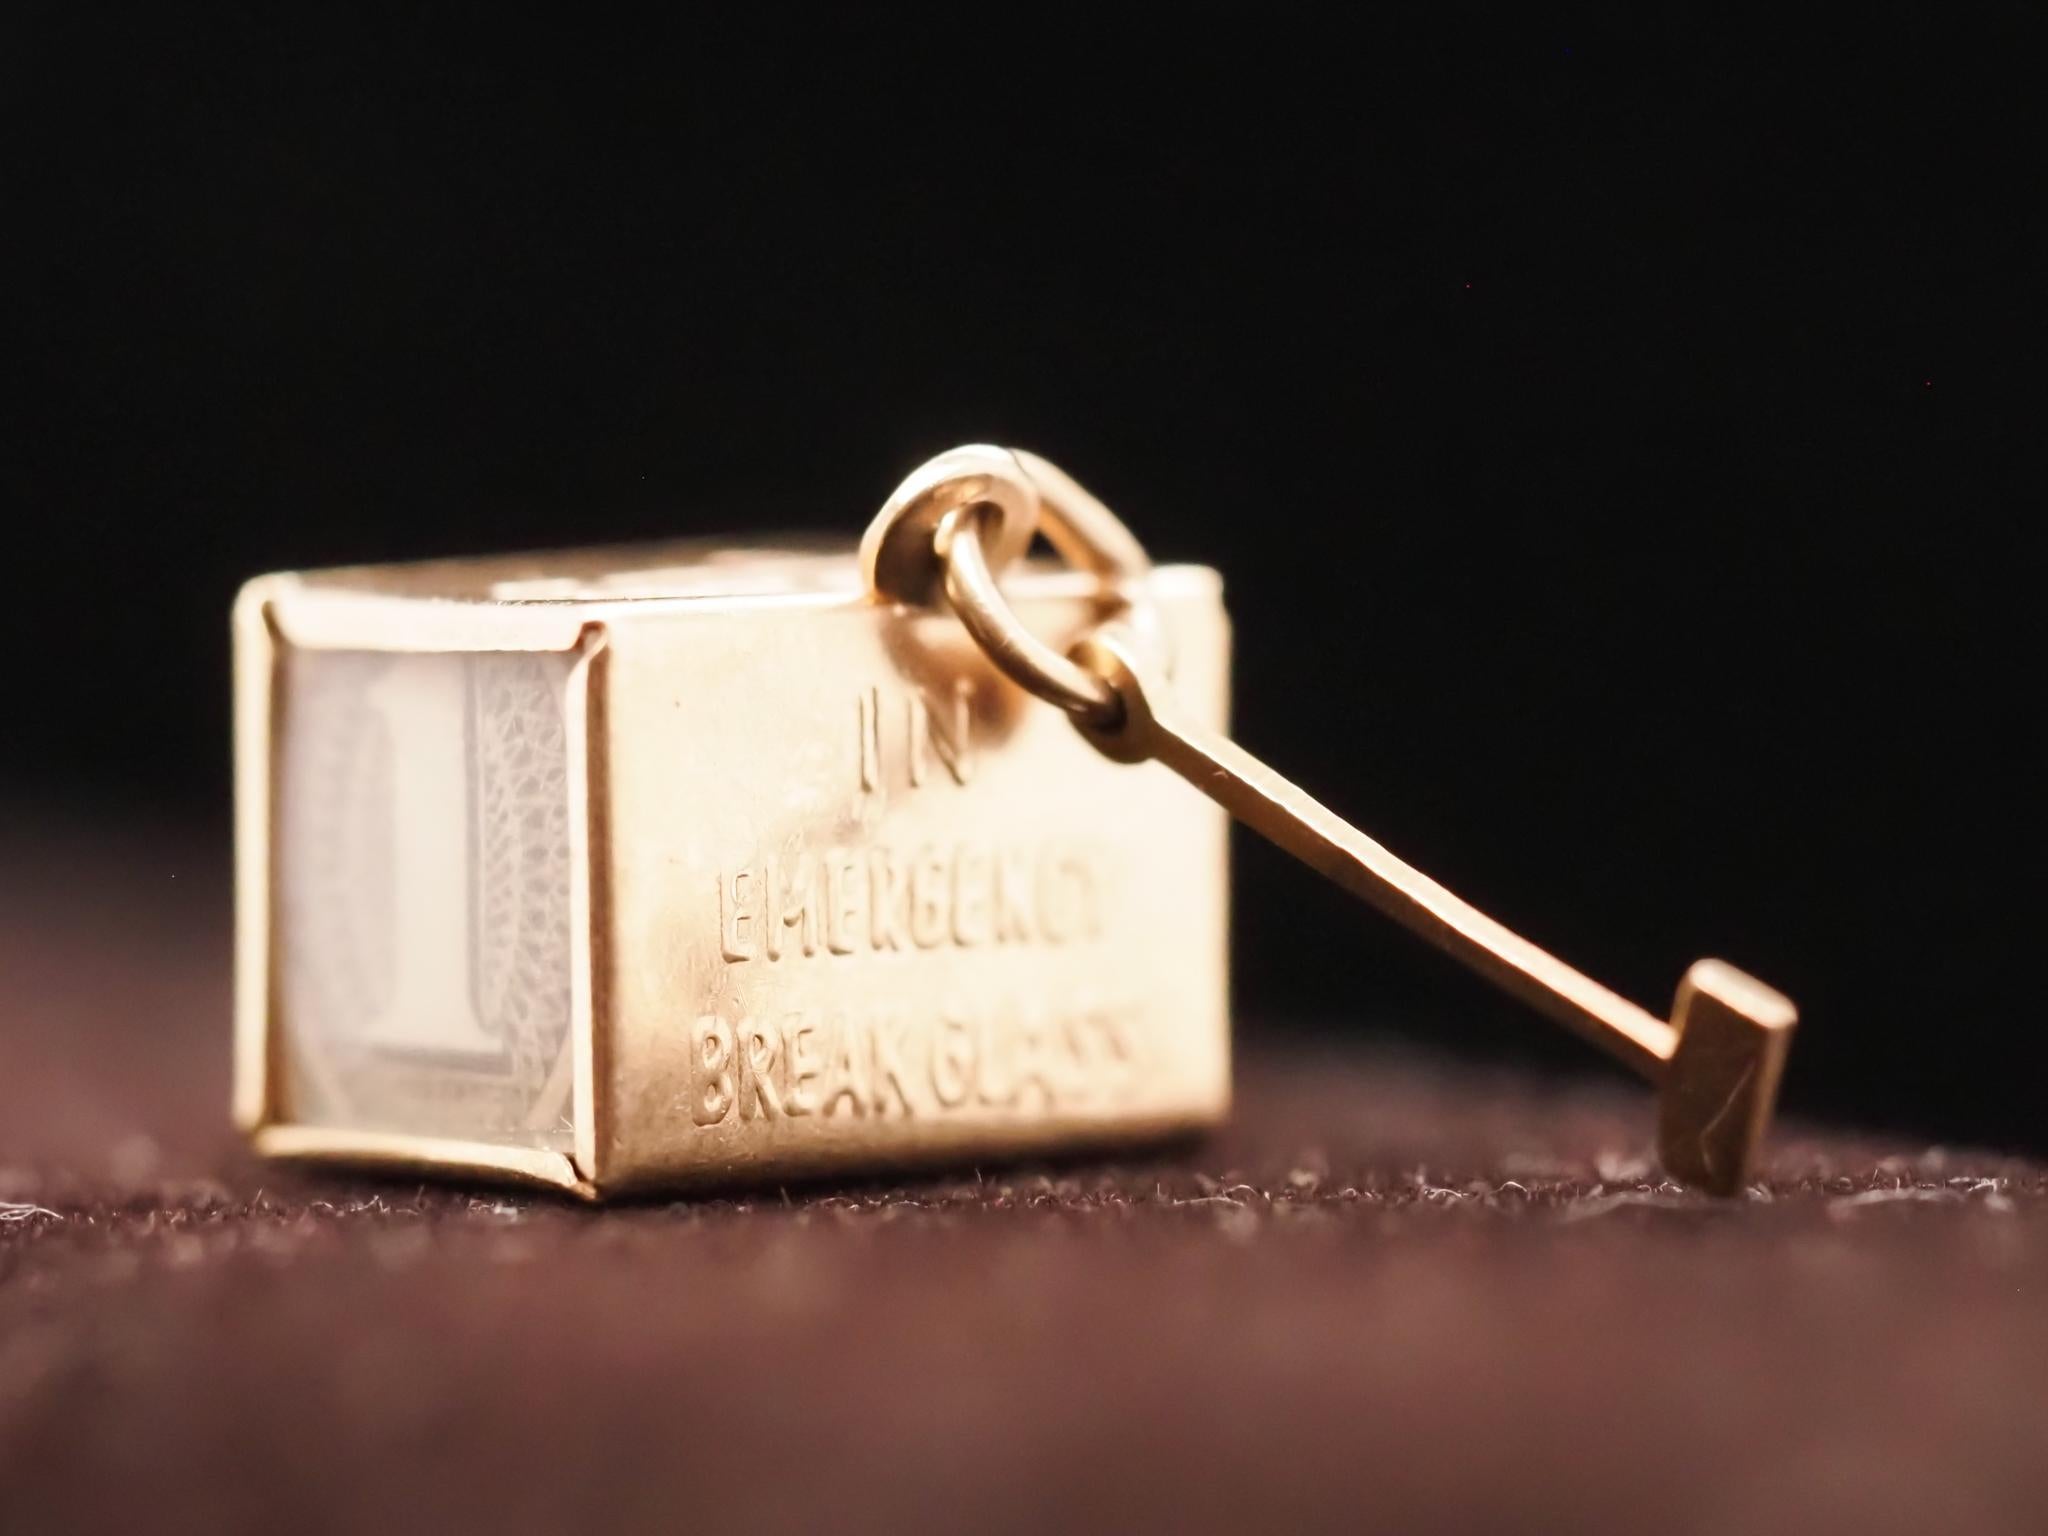 14K Yellow Gold Mad Money Dollar Bill Box Charm Pendant

Year: 1980s
Item Details:
Metal Type: 14K Yellow Gold [Hallmarked, and Tested]
Weight: 3.3 grams
Dimensions: 9/16 x 3/8x 3/8 inches
Condition: Excellent
vintage